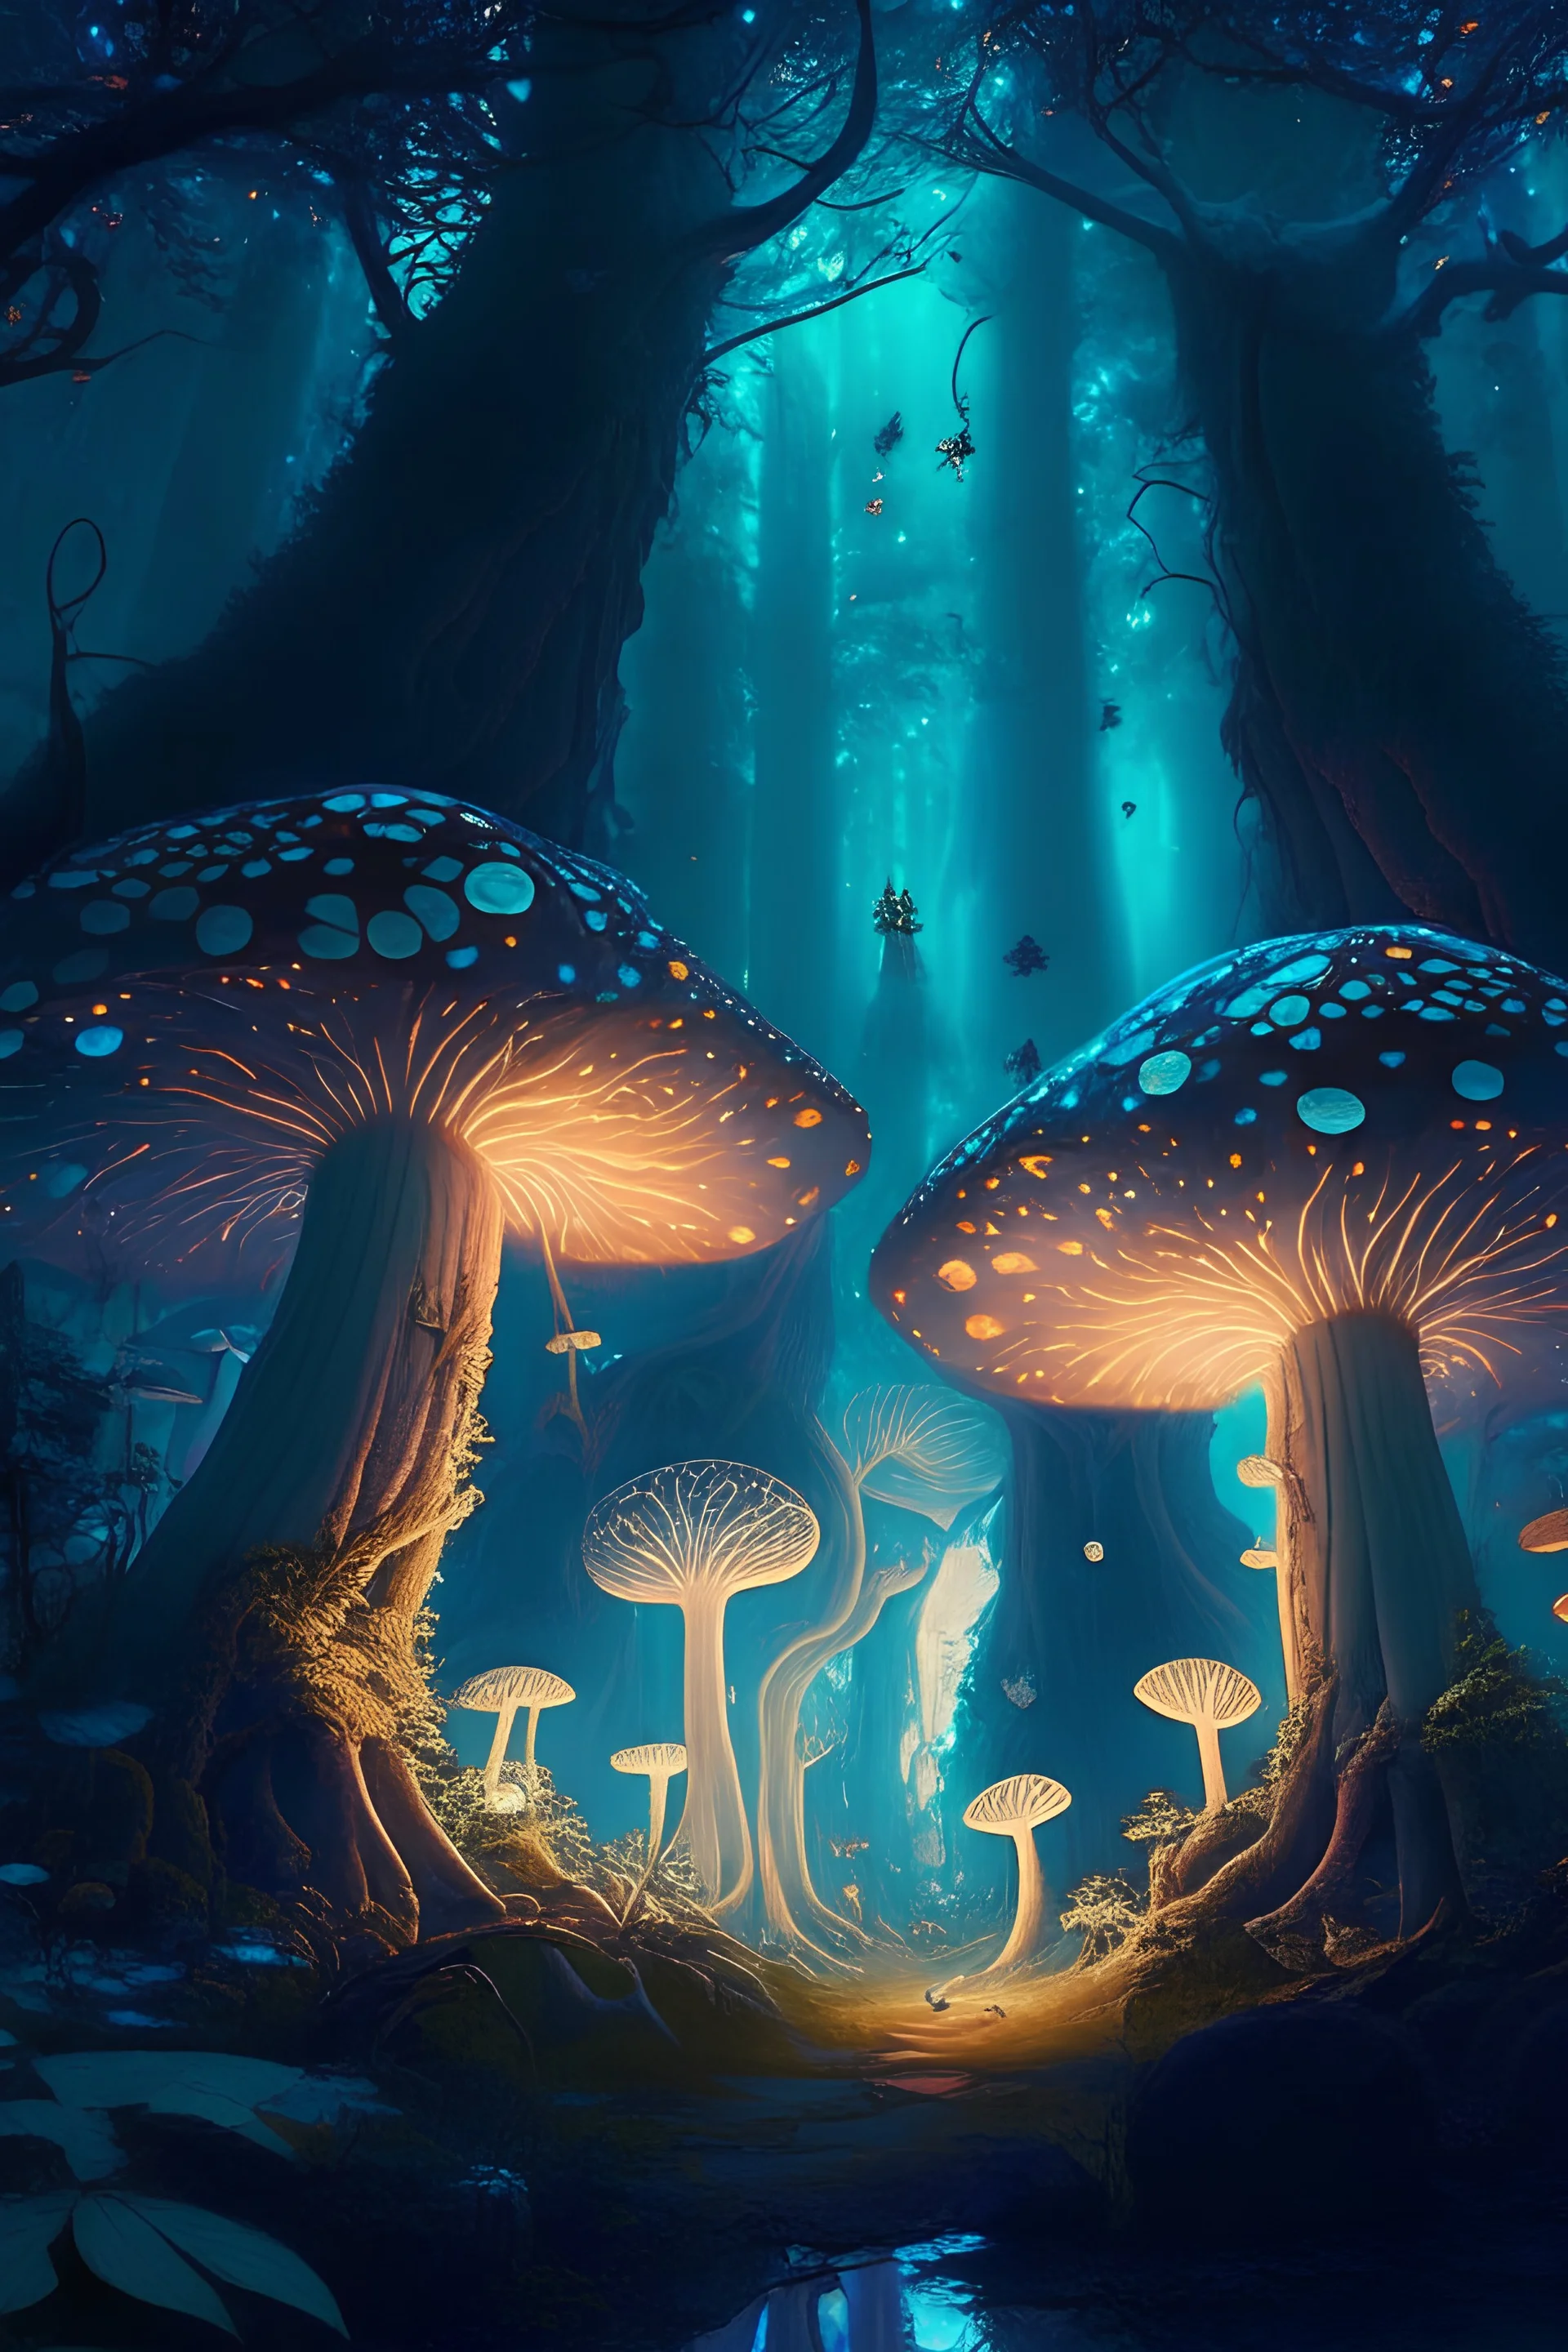 A mystical forest with towering trees, glowing mushrooms, and a sense of wonder and enchantment